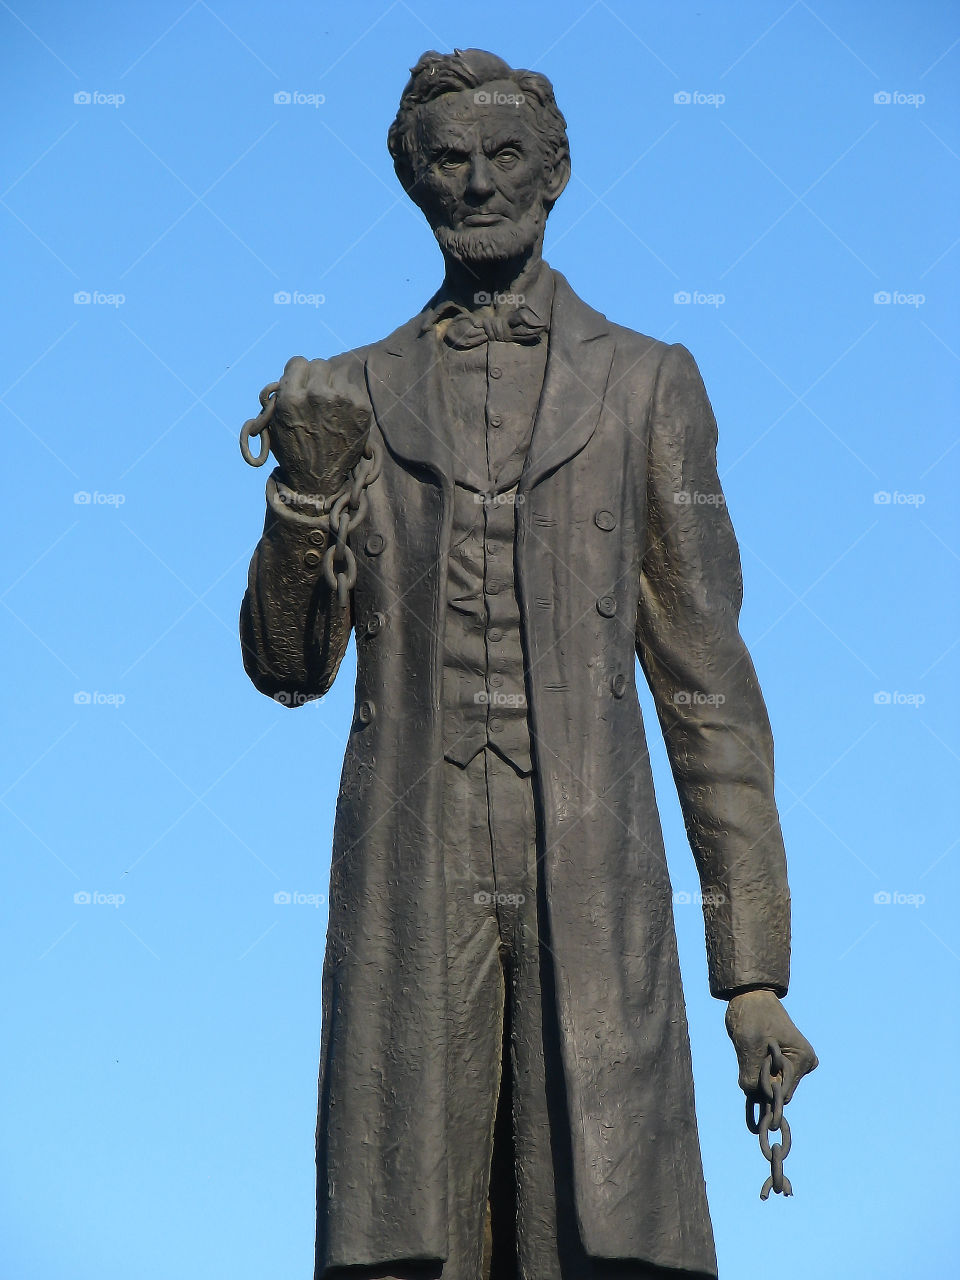 Abraham Lincoln. Lincoln Sculpture under blue sky.